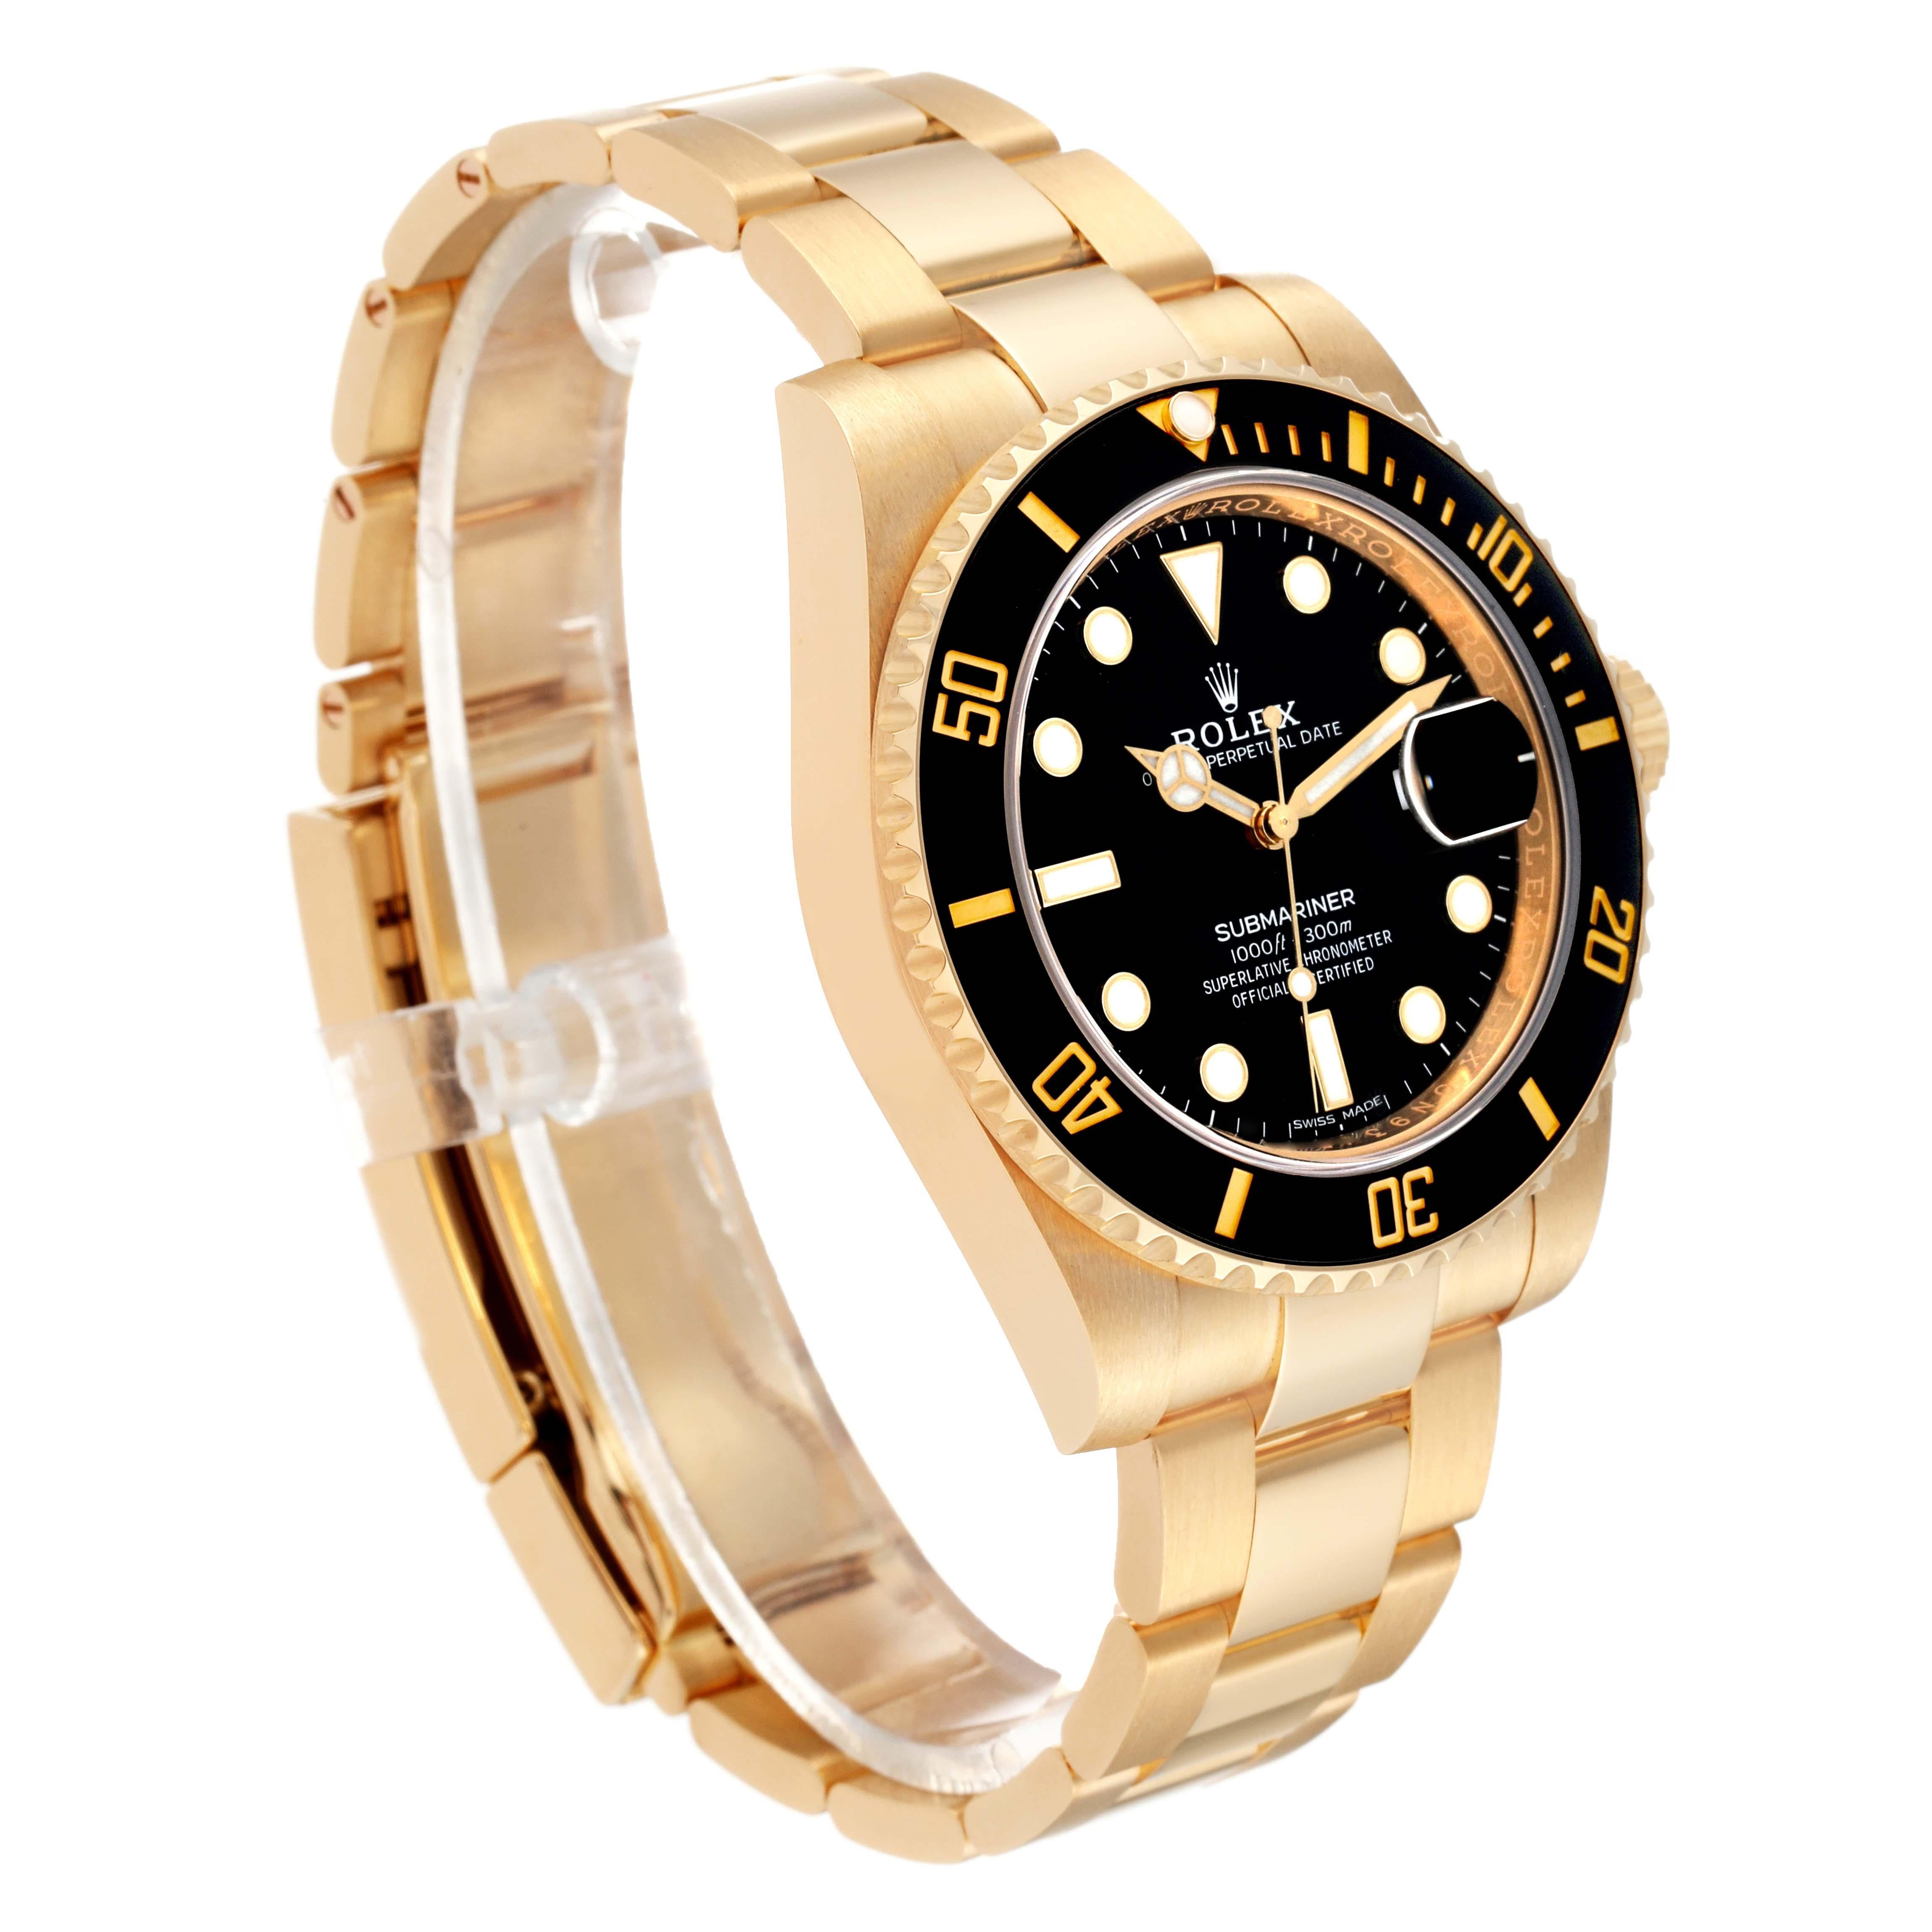 Rolex Submariner Black Dial Yellow Gold Mens Watch 116618 Box Card For Sale 1